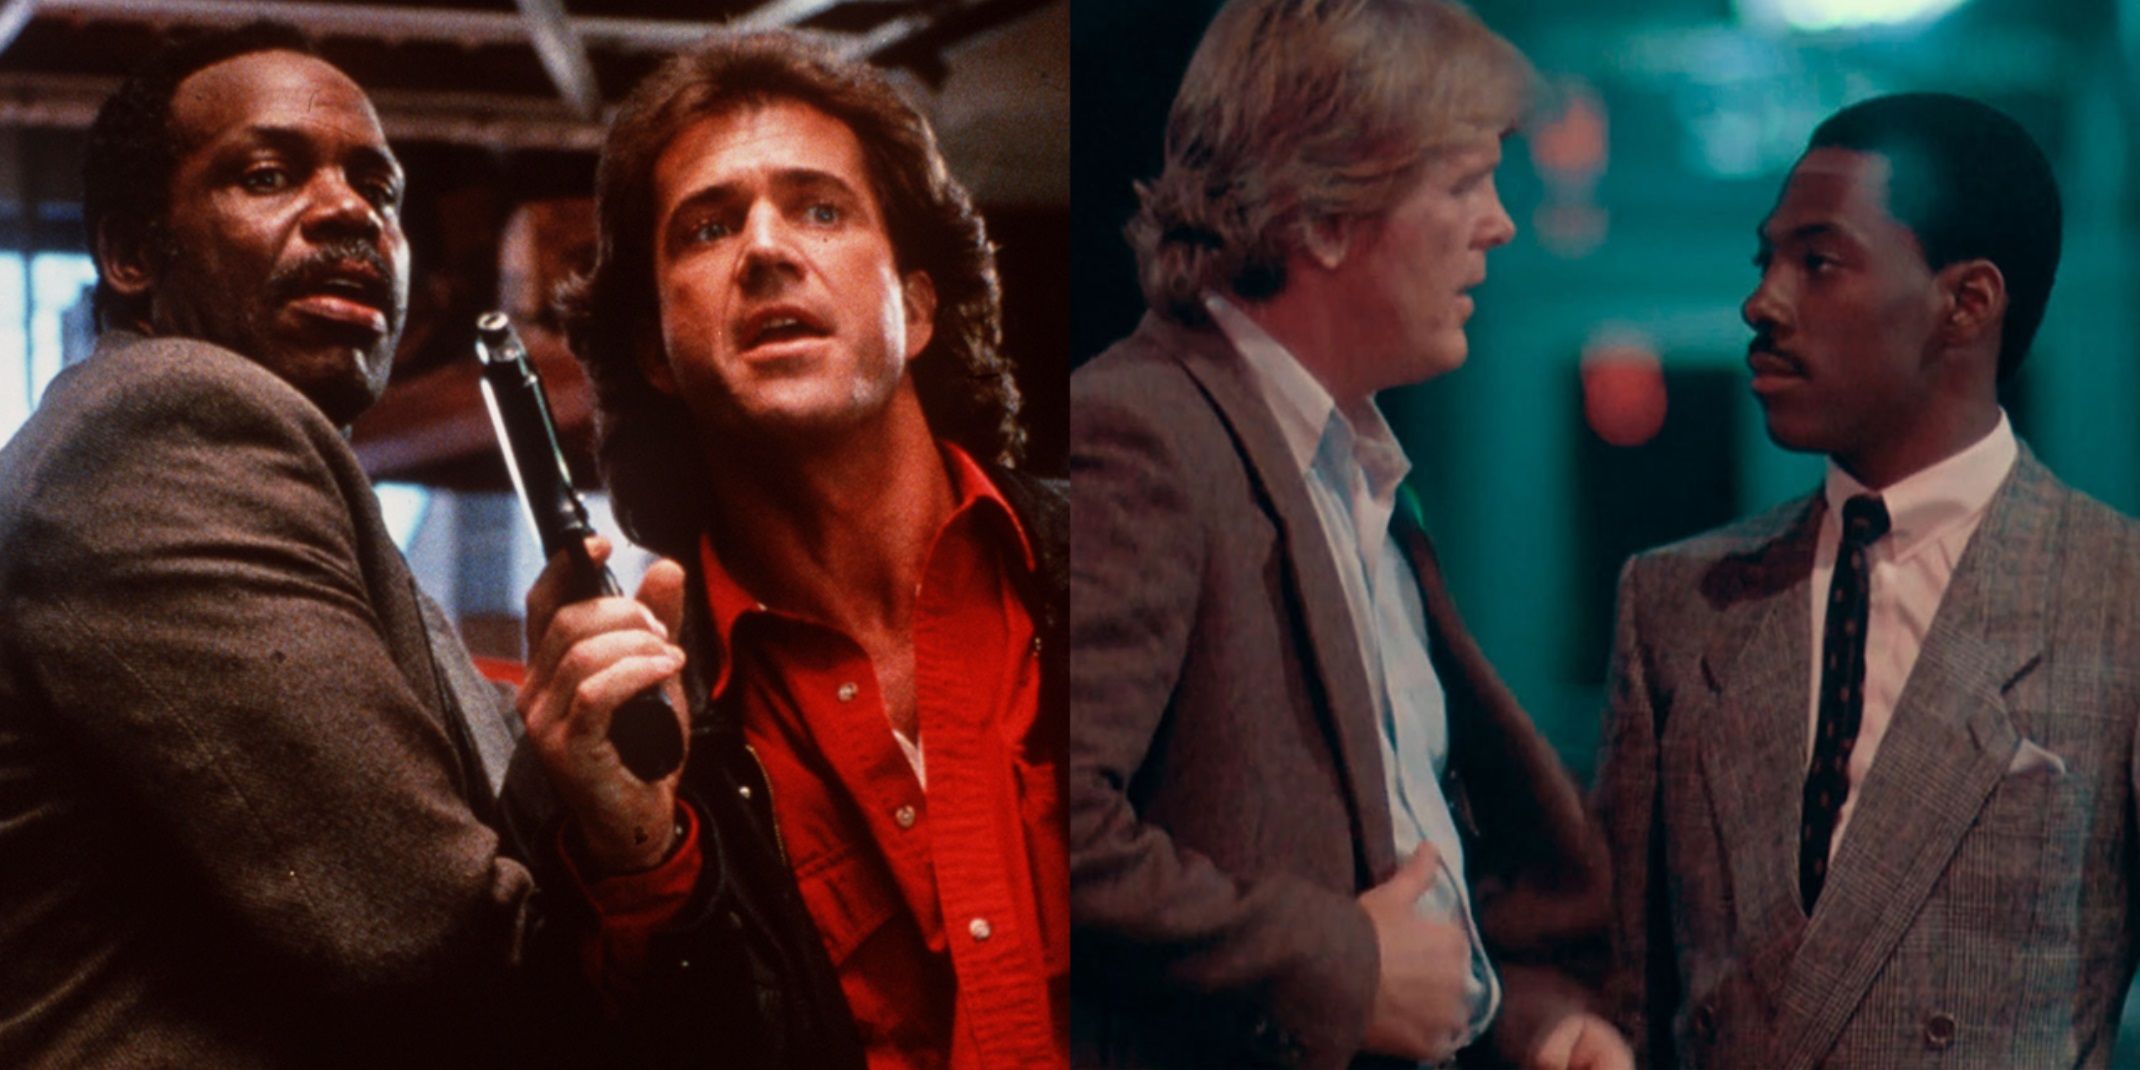 Split image of Riggs and Murtaugh in Lethal Weapon and Cates and Reggie in 48 Hrs